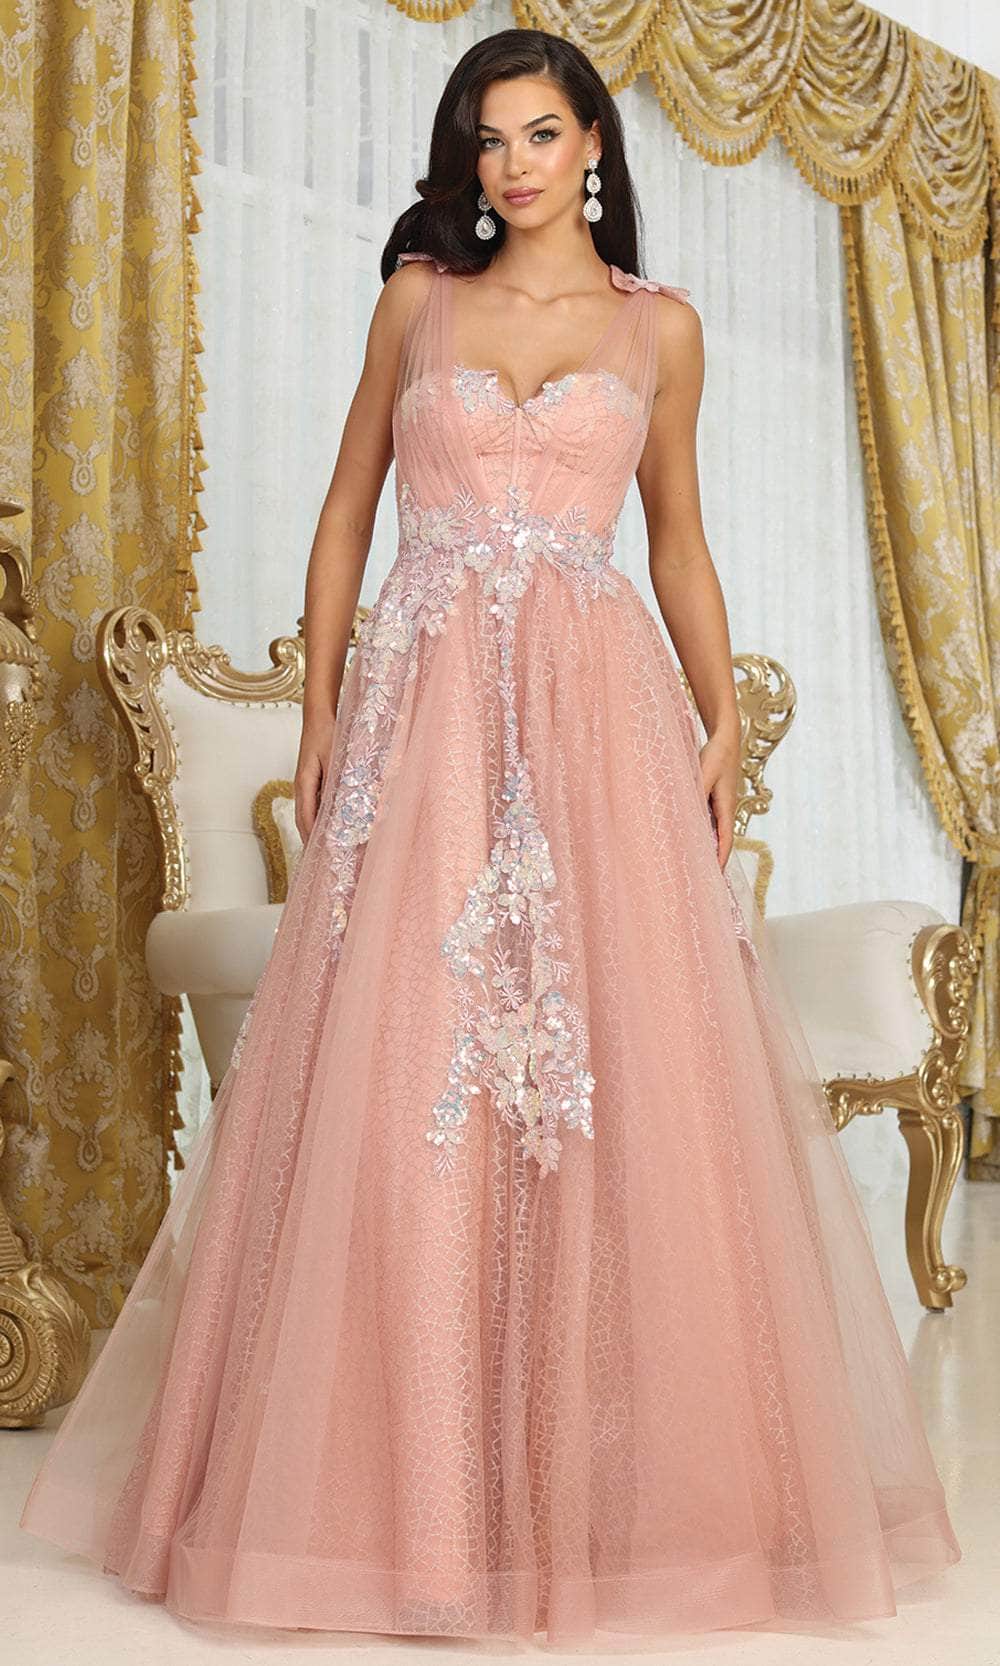 Image of May Queen RQ8080 - Illusion Straps Sweetheart Prom Gown